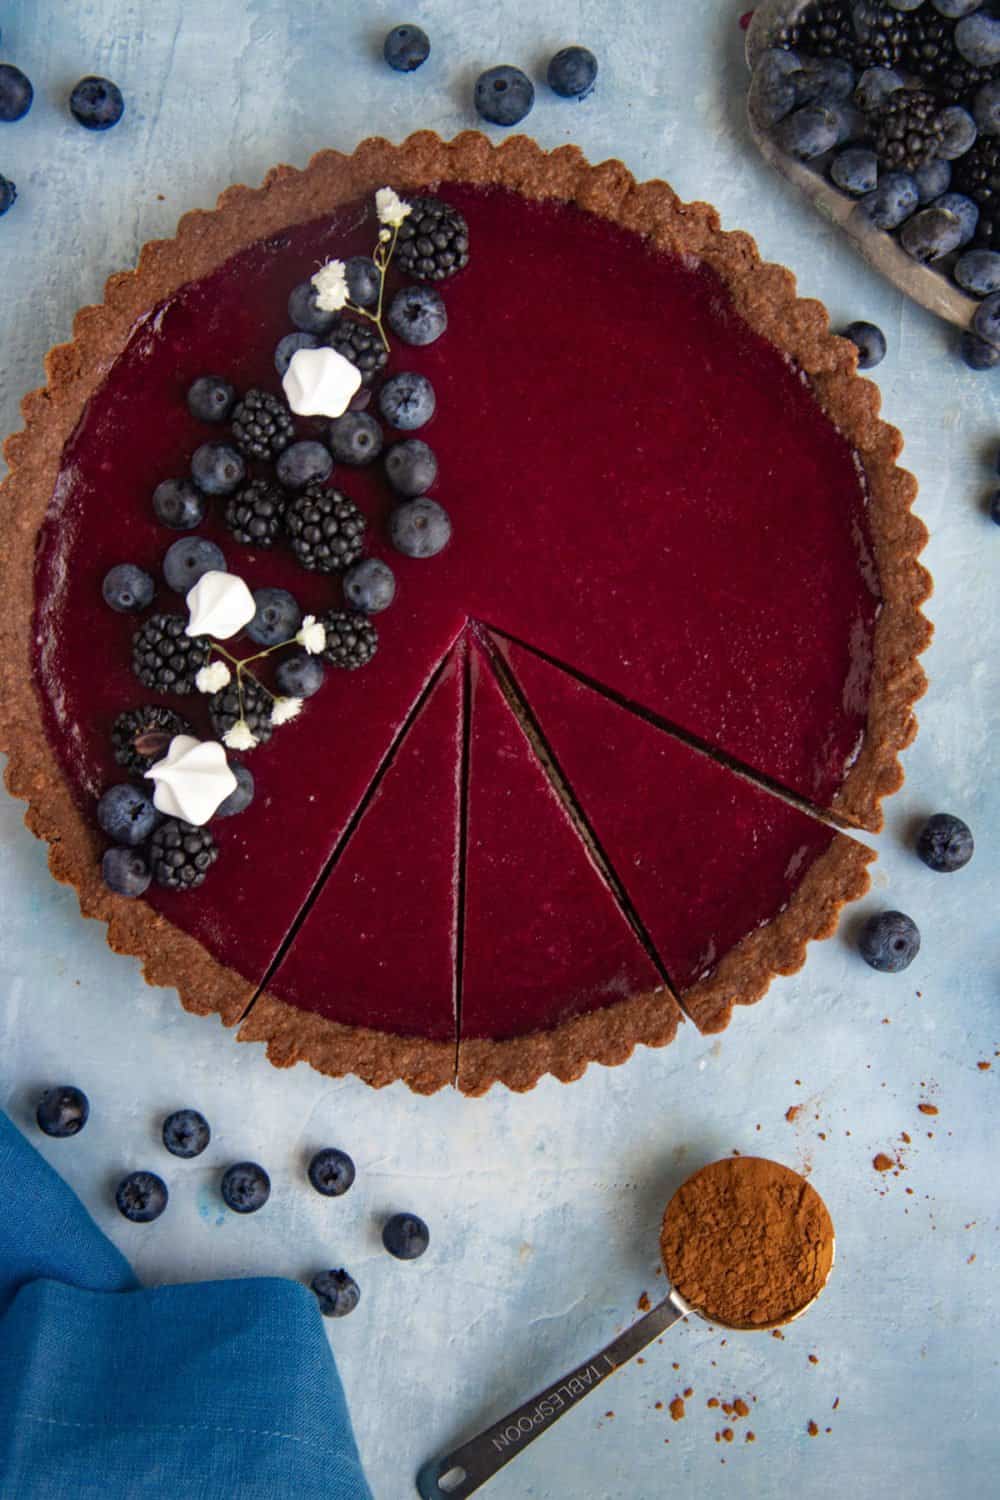 Blueberry Tart with Chocolate Cookie Crust